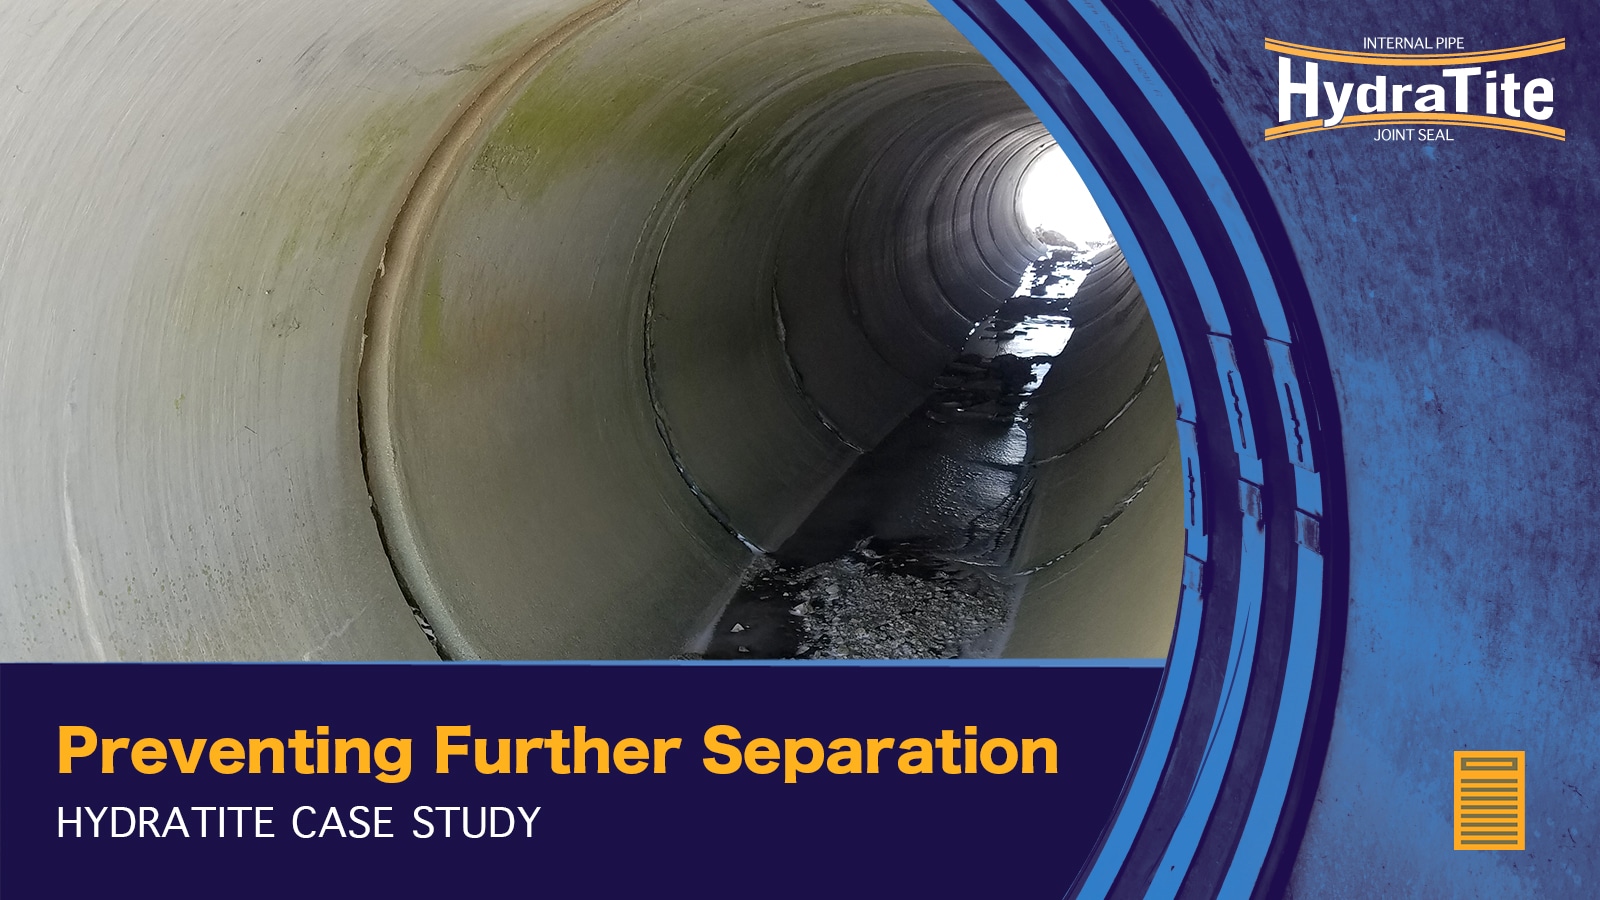 Exposed joints in a culvert, 'Preventing Further Separation, HydraTite Case Study'